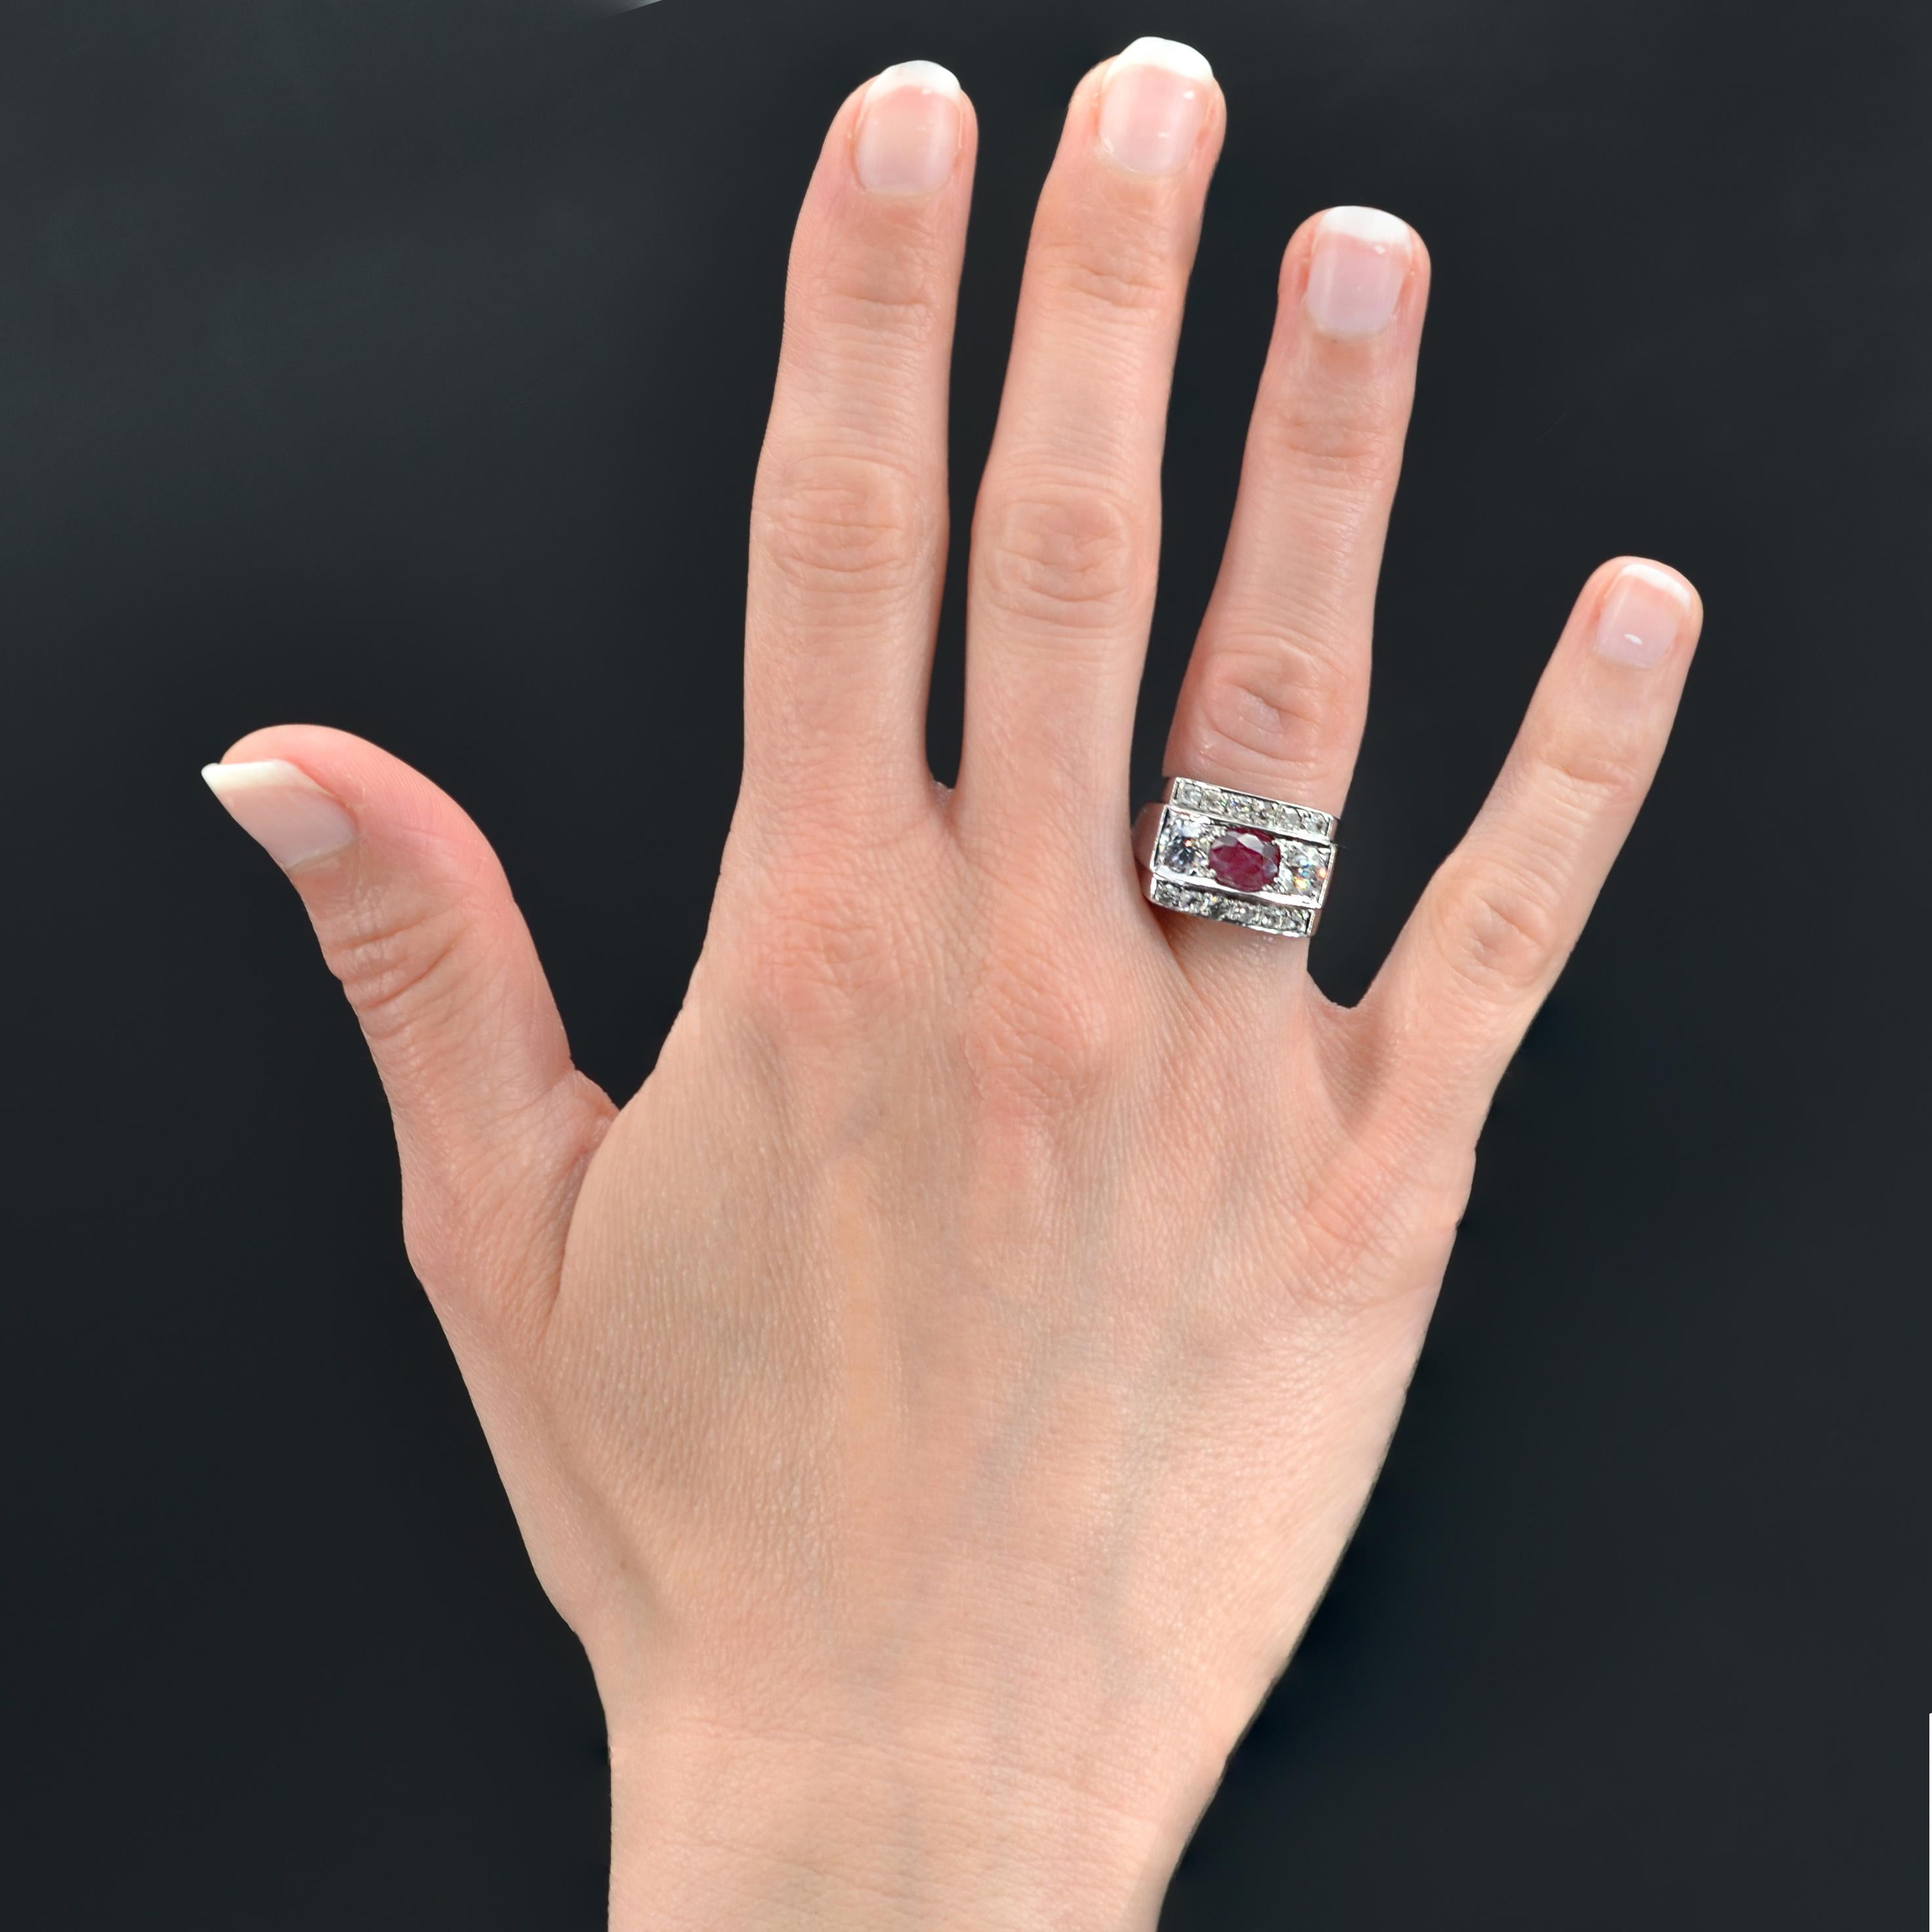 Ring in platinum.
Antique Art Deco ring, it presents a setting with geometric lines adorned in the center of a cushion-cut ruby shouldered by 2 antique brilliant-cut diamonds on both sides. Two lines of 6 antique- cut diamonds border the set. The